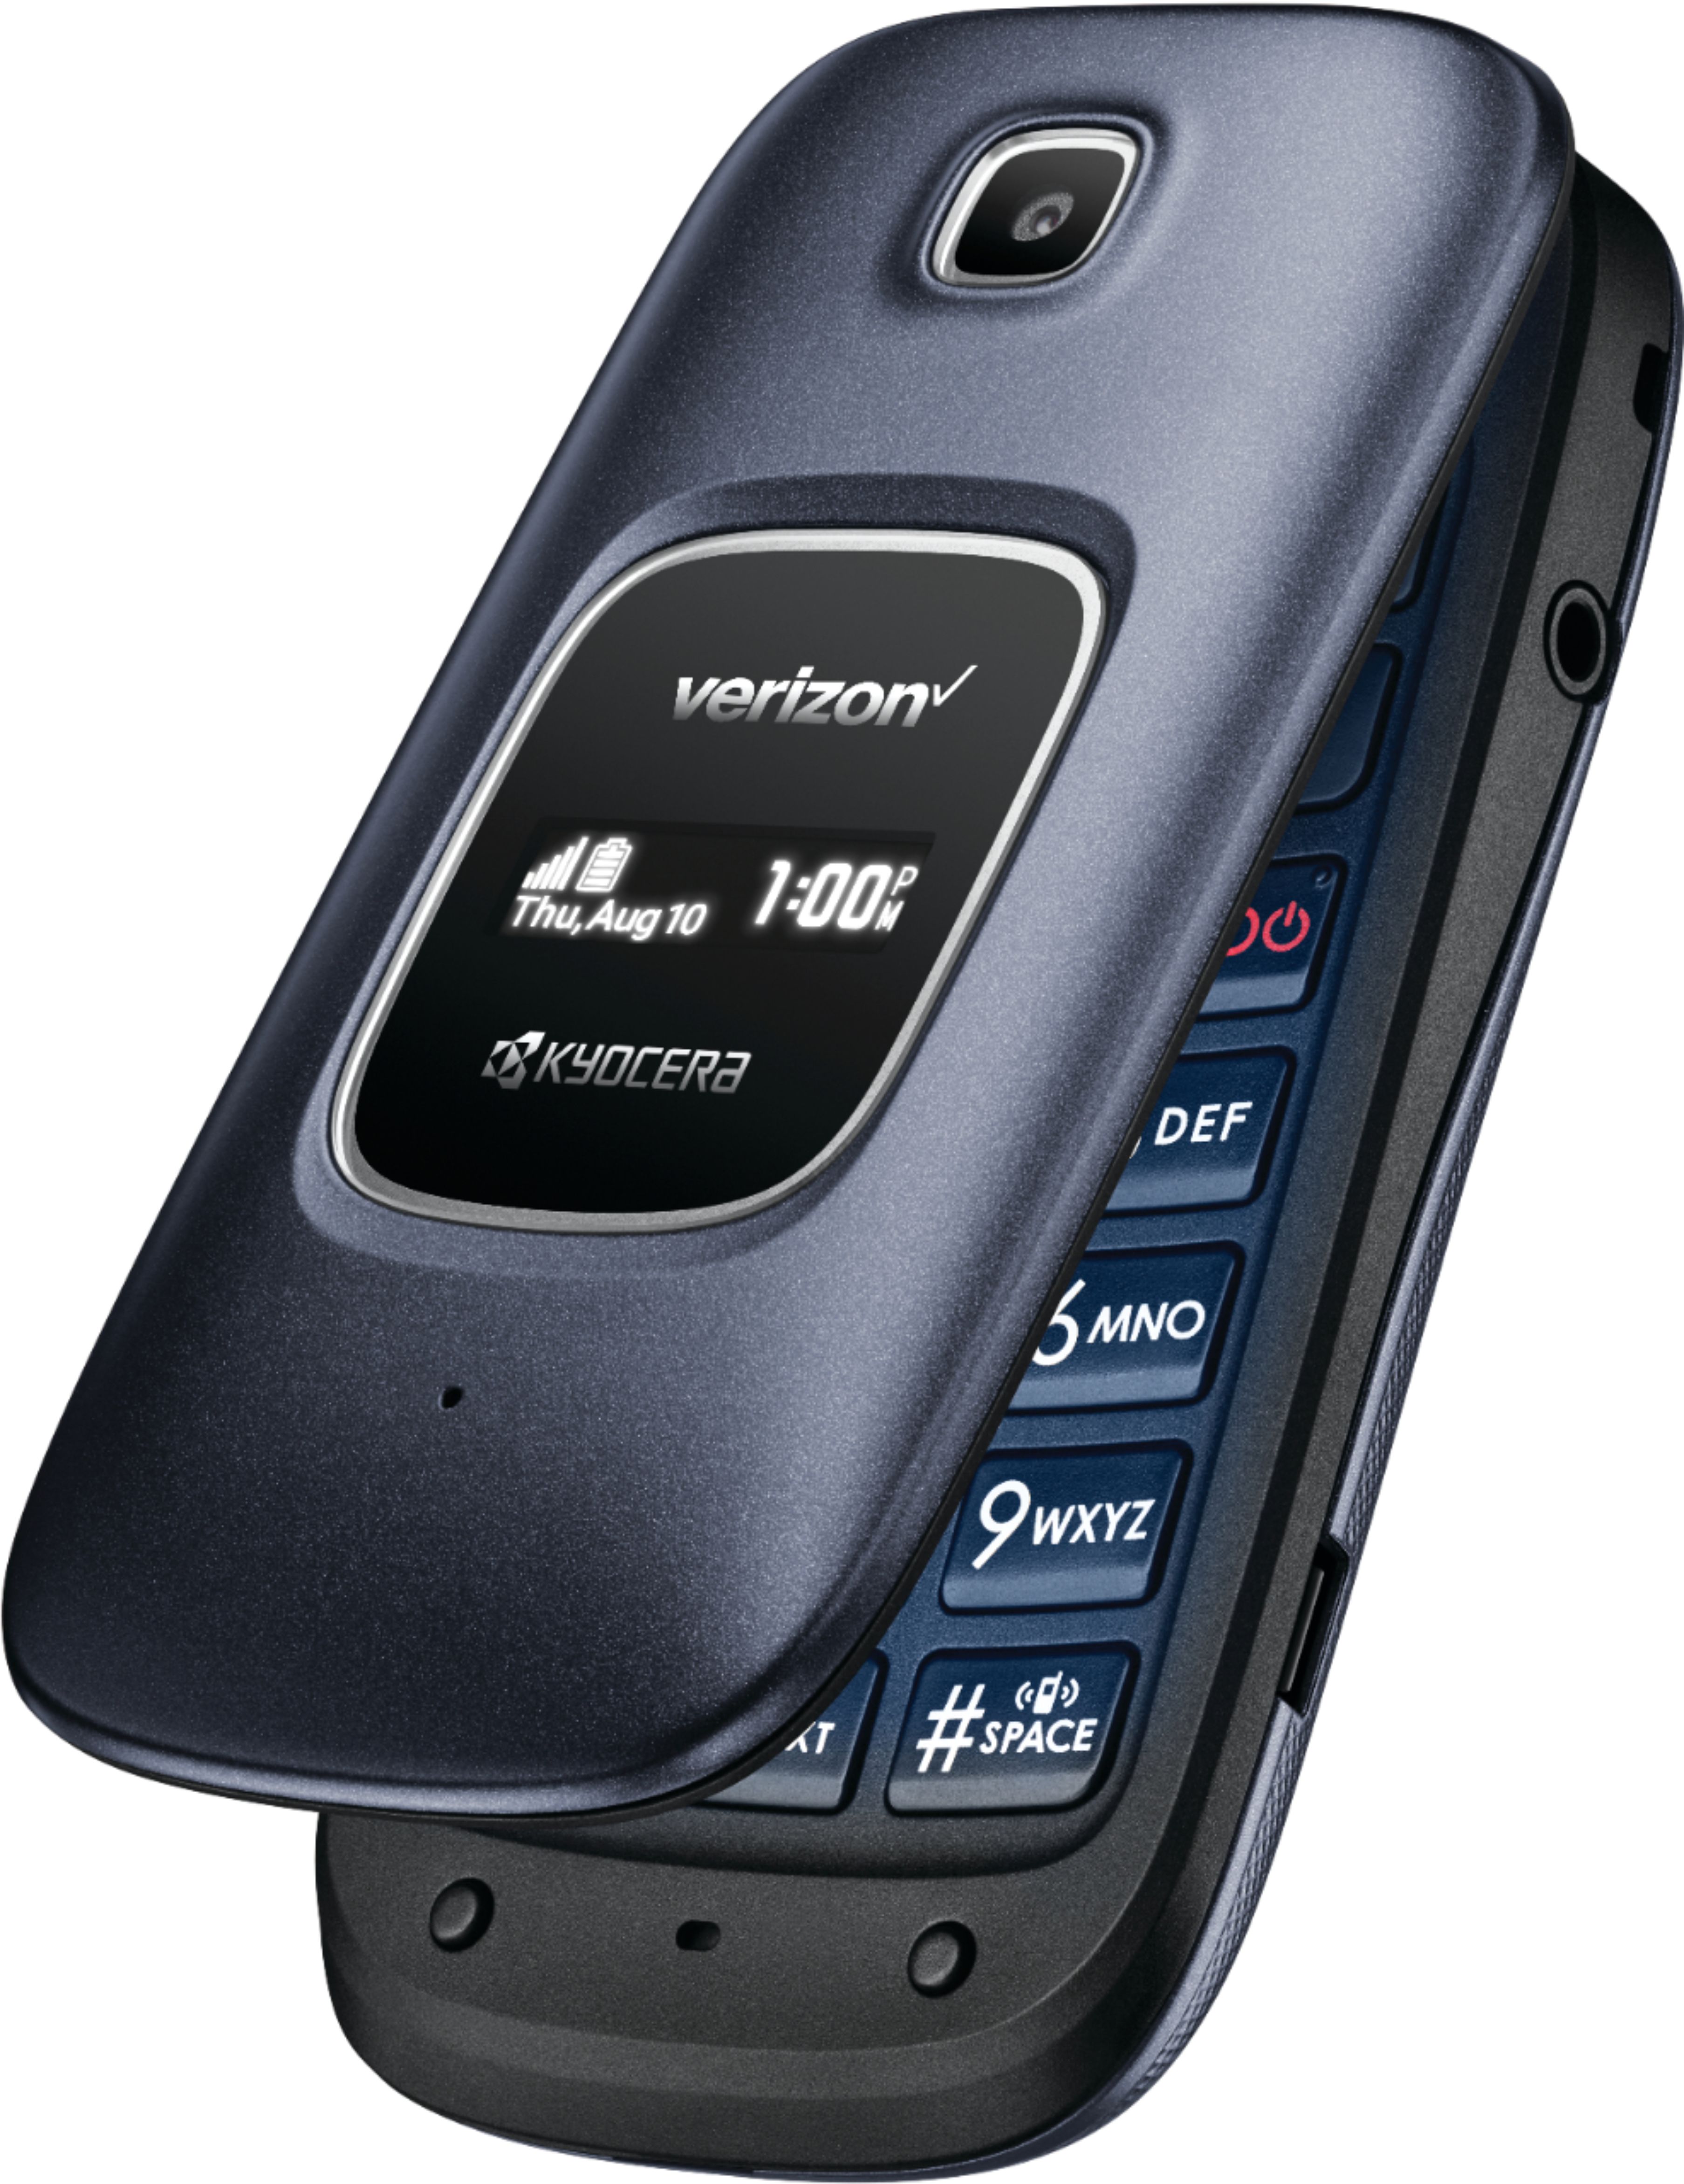 Kyocera Kx444 Push-to-talk Color Cellular Phone for Verizon Wireless for sale online 